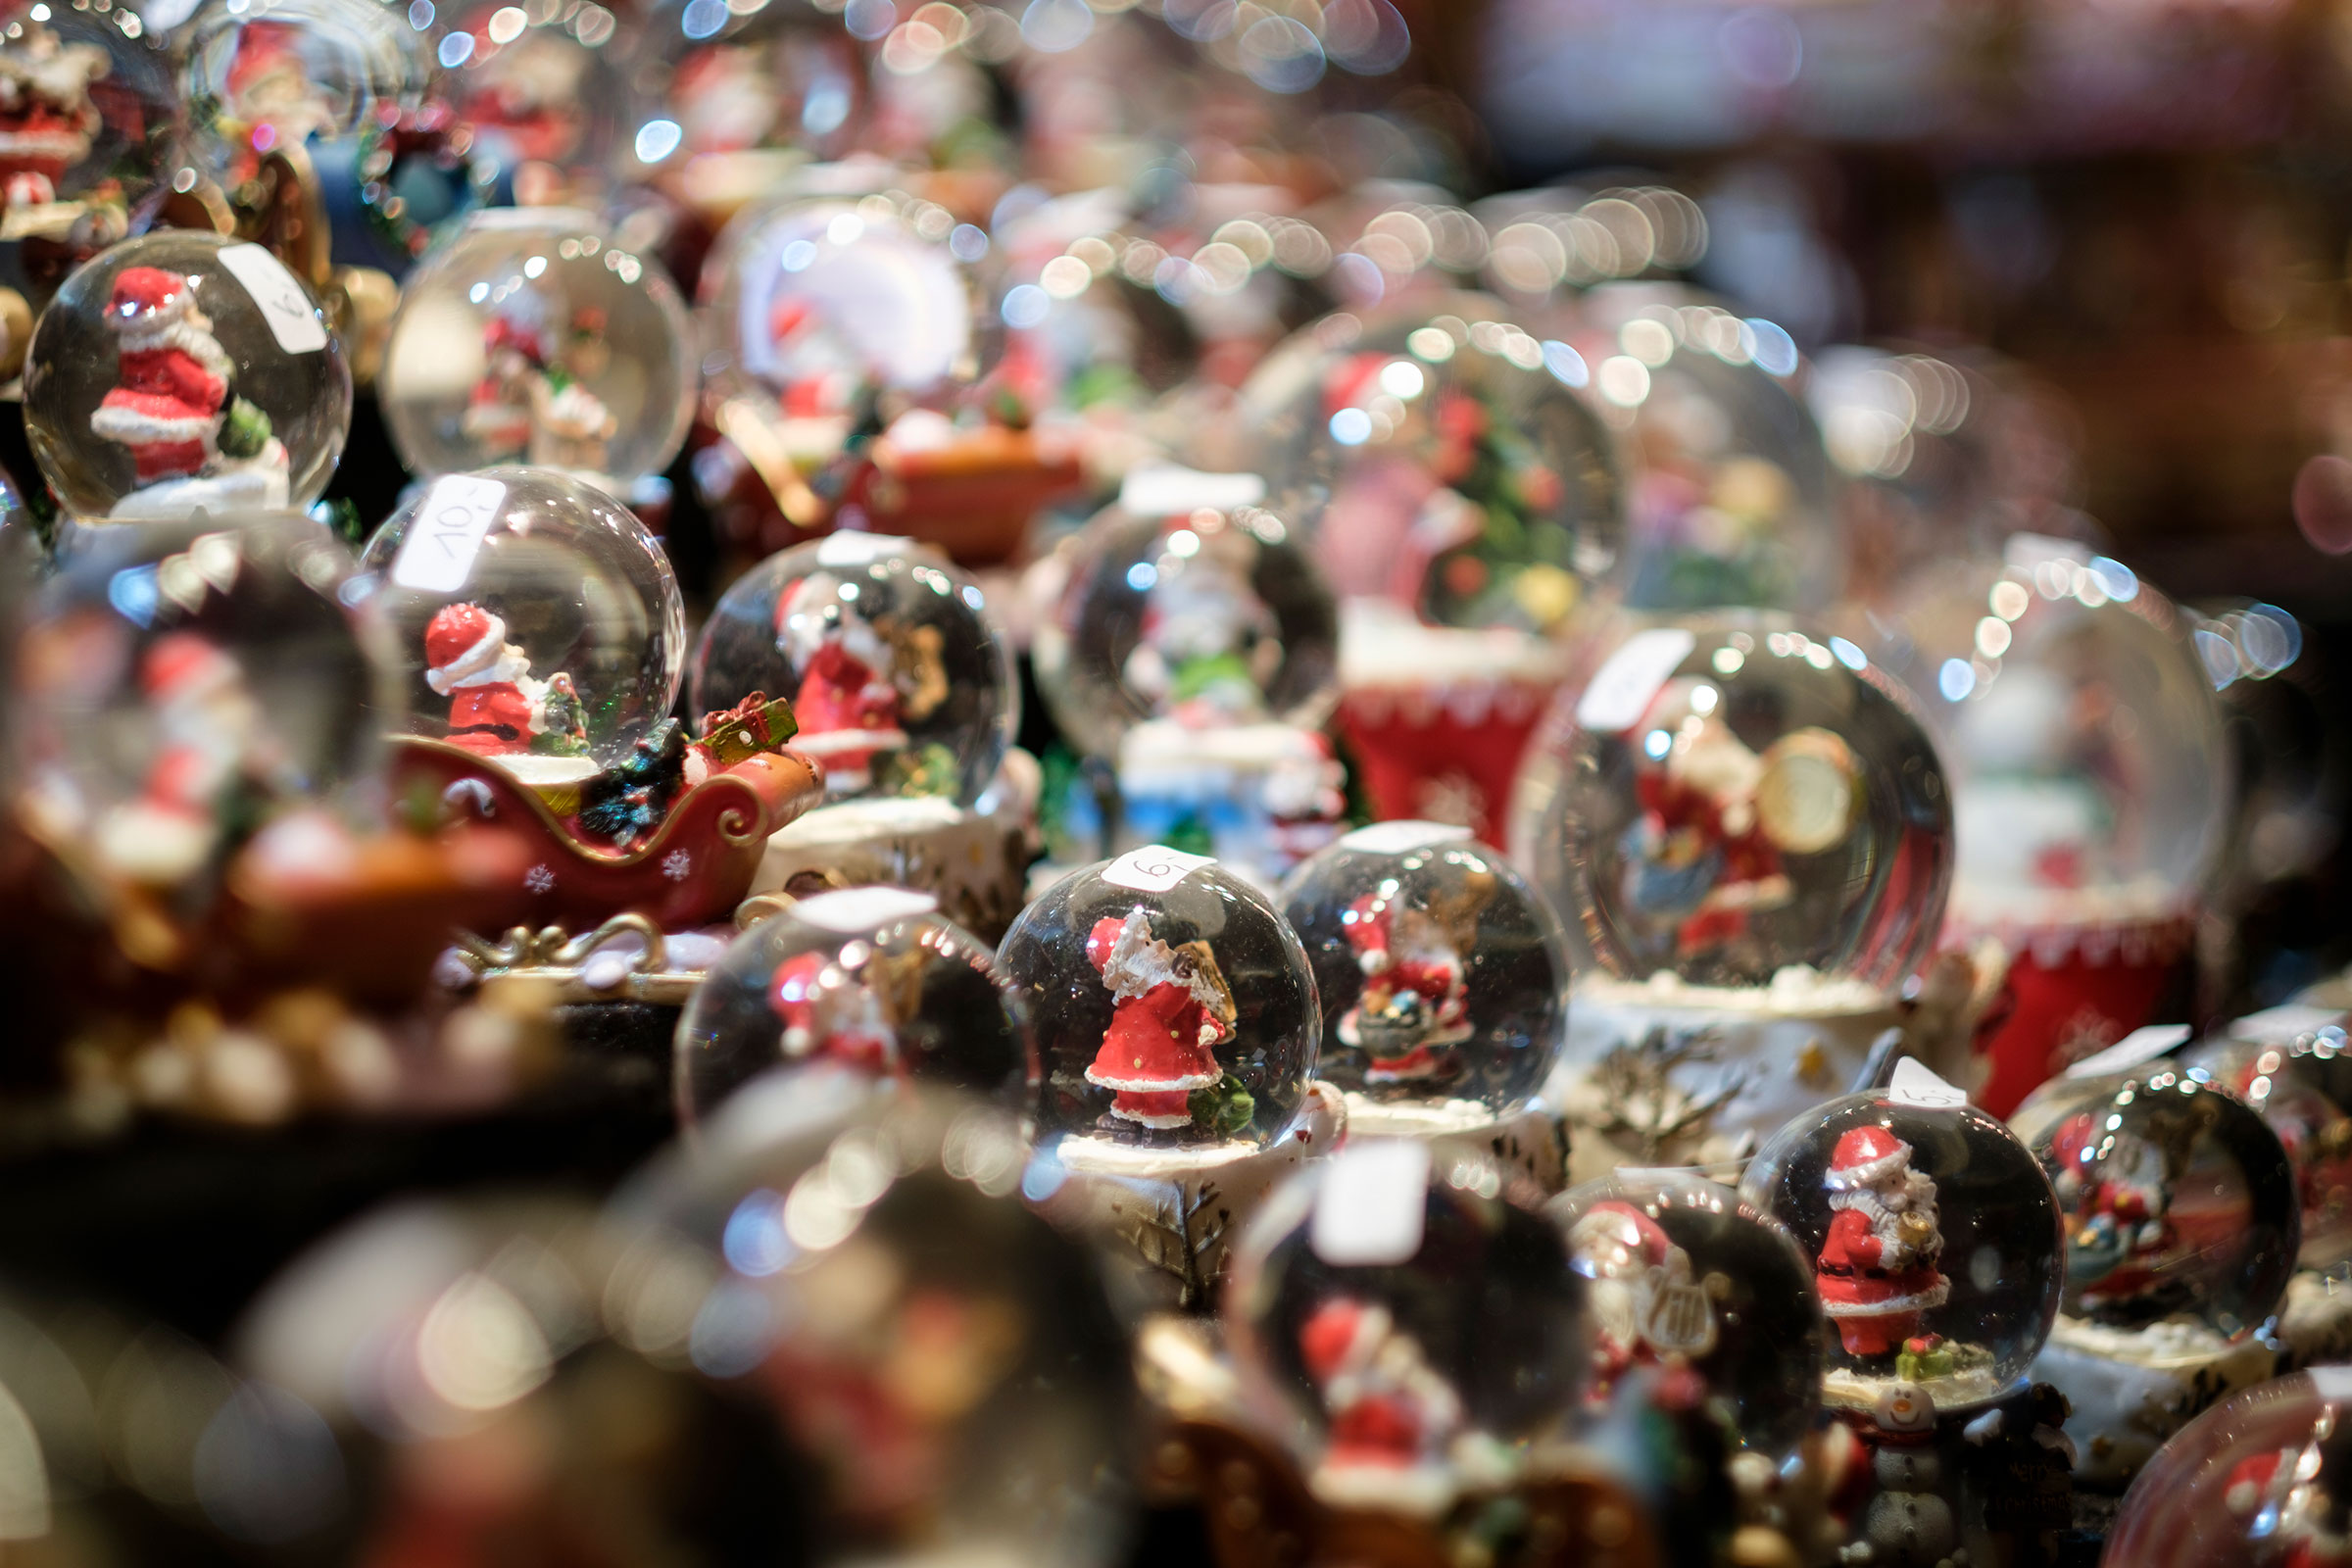 Snow globes displayed for sale at the Christmas Market on Dec. 21, 2021 in Aachen, Germany. (Thierry Monasse—Getty Images)